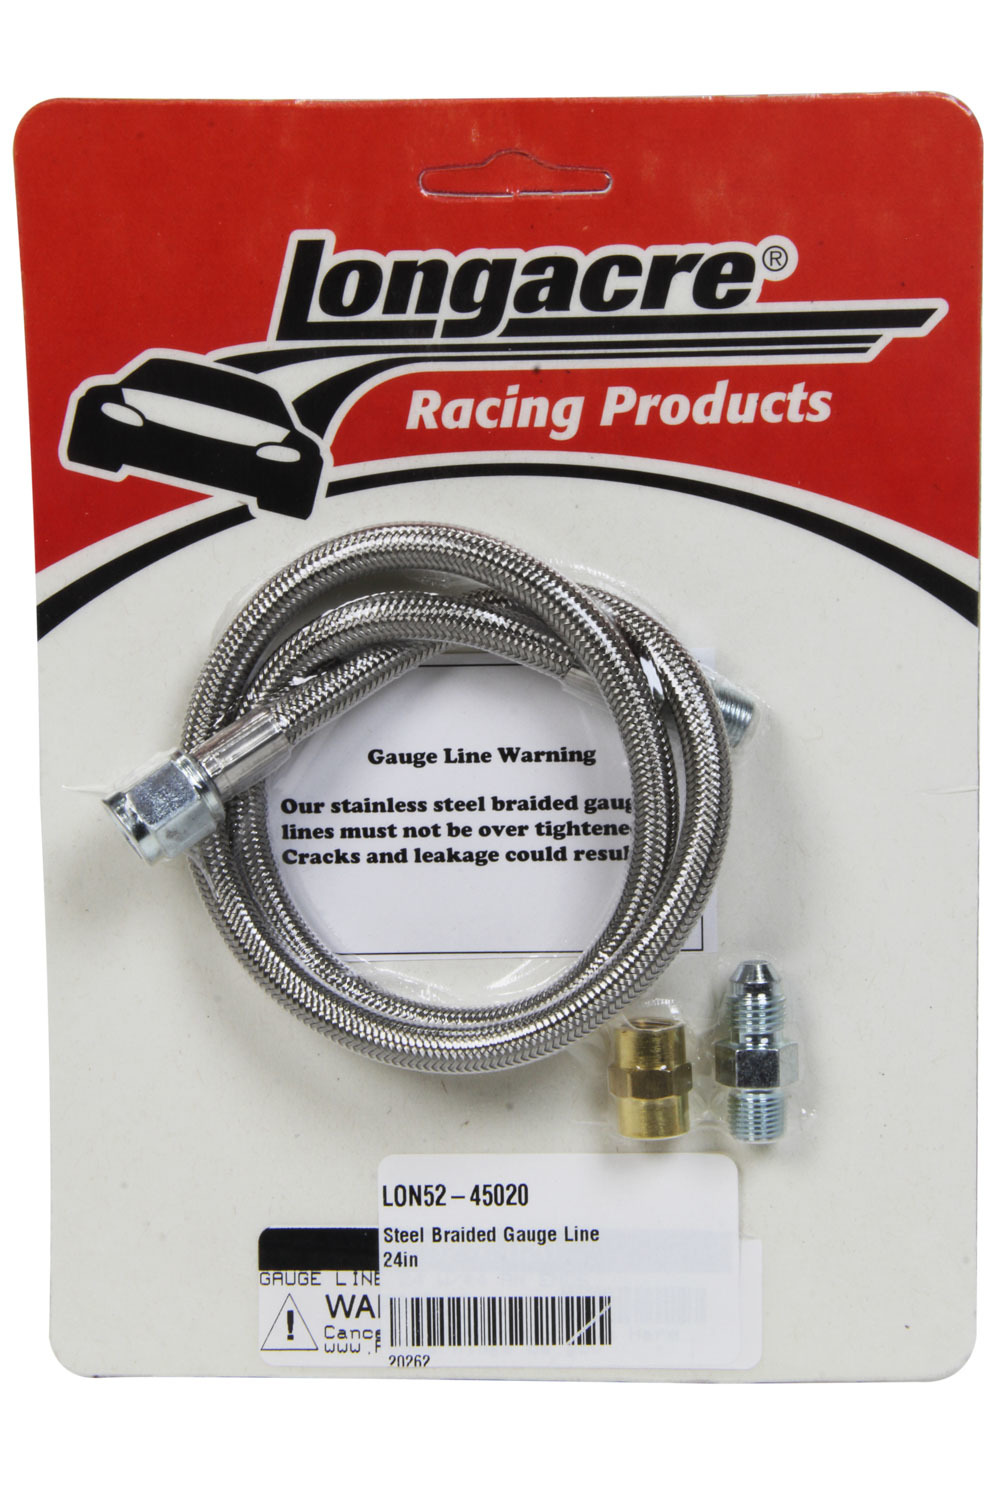 Longacre 52-45020 - Gauge Line Kit, 4 AN, 24 in Long, 4 AN Female to 1/8 in NPT Male, Fittings Included, PTFE, Braided Stainless, Mechanical Pressure Gauges, Kit